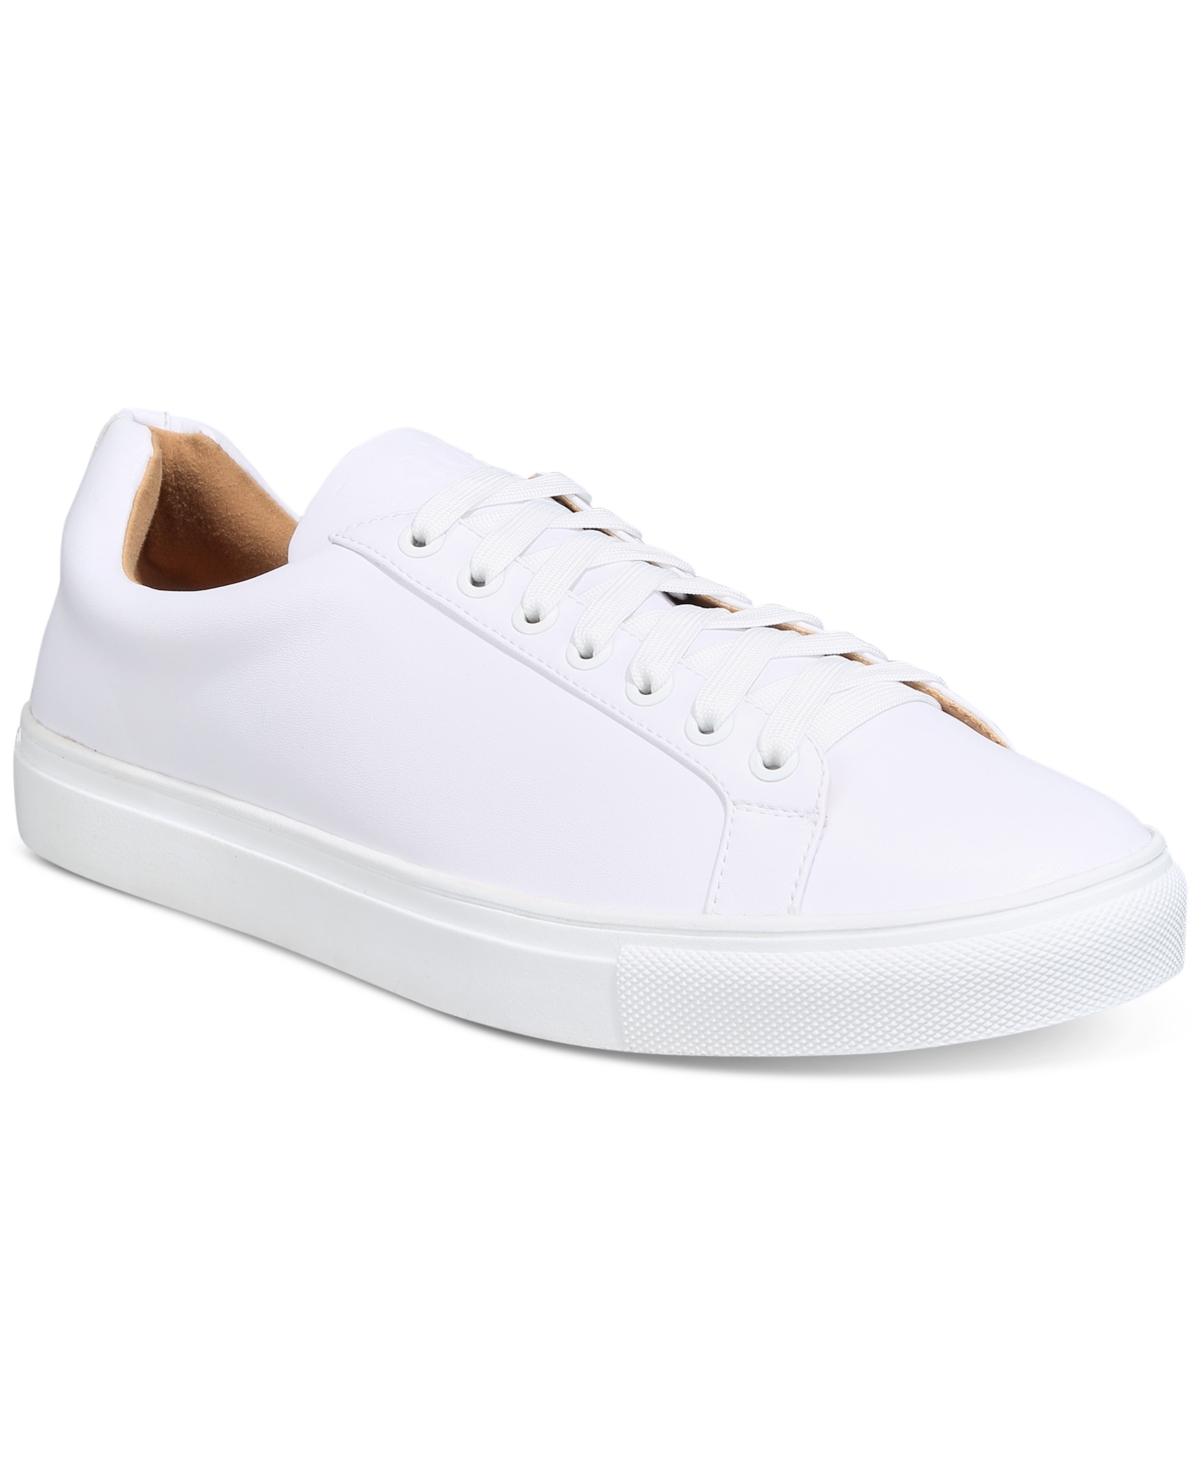 Women's Jordin Lace-Up Low-Top Sneakers-Extended sizes 9-14 - White